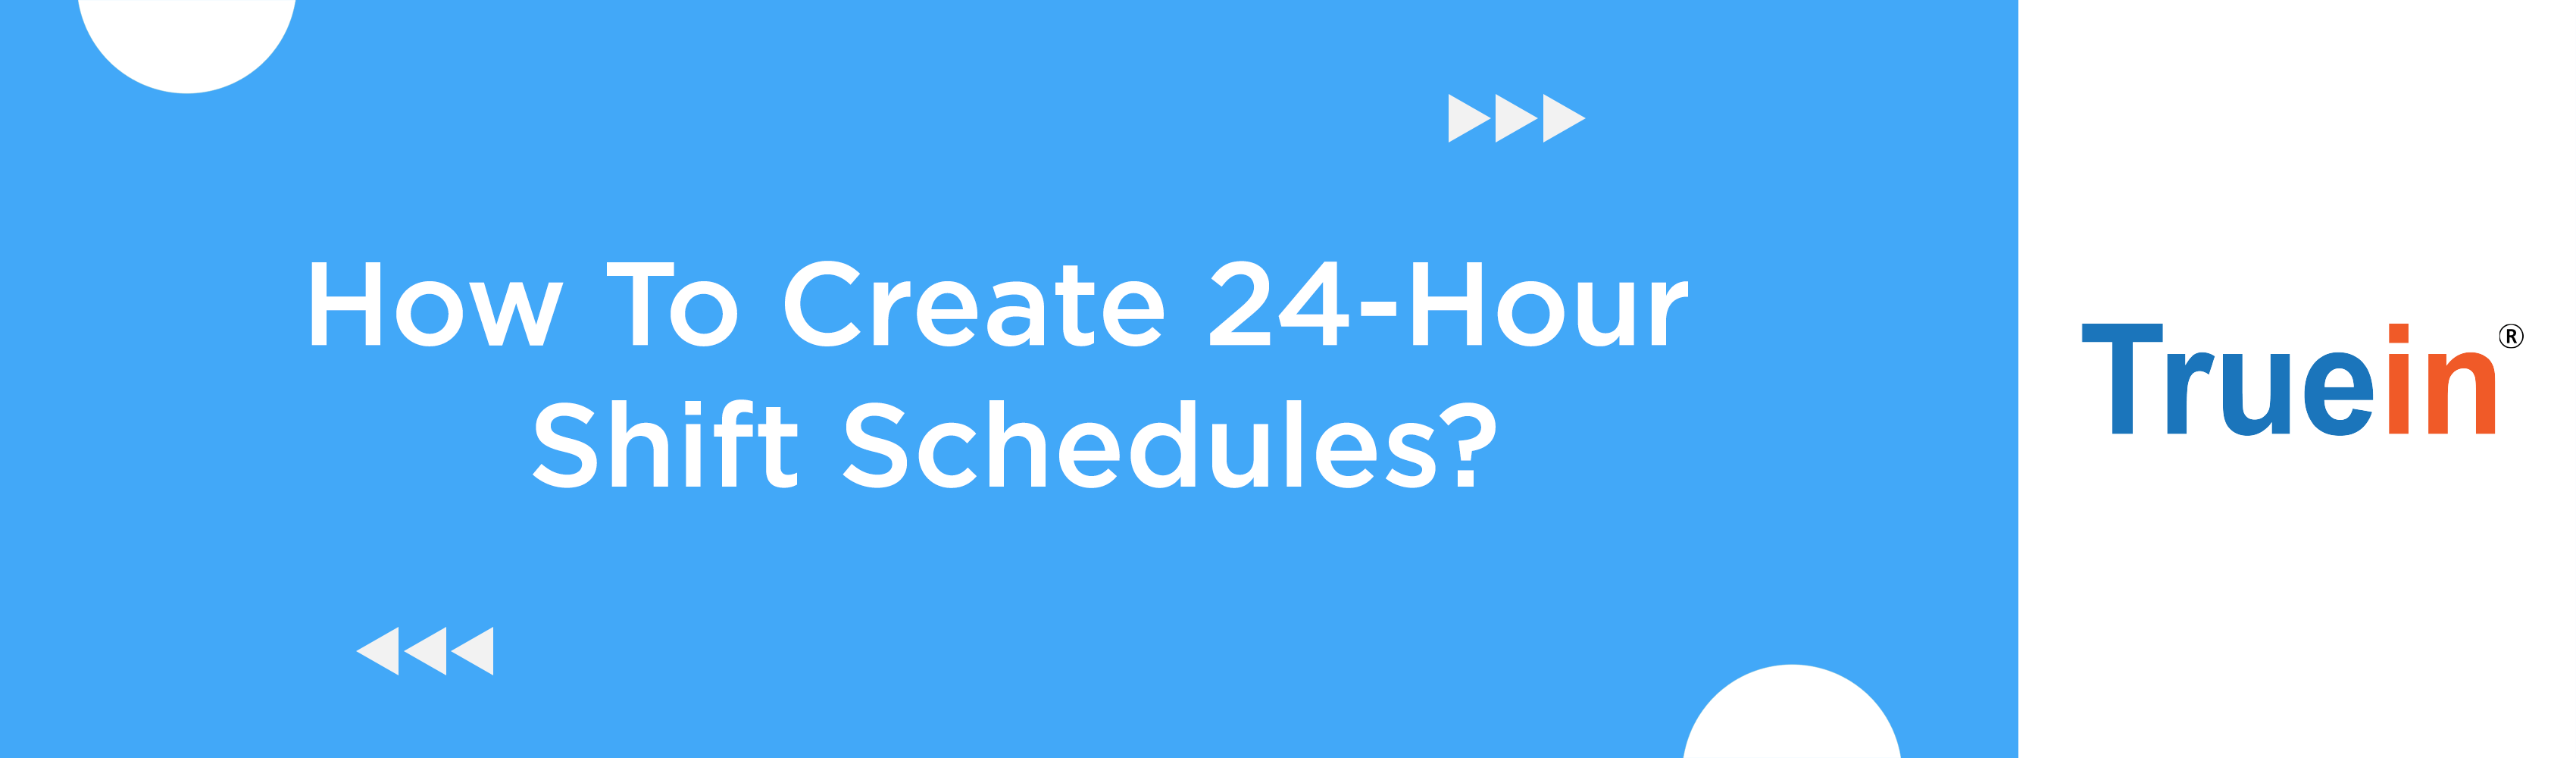 How To Create 24-Hour Shift Schedules?